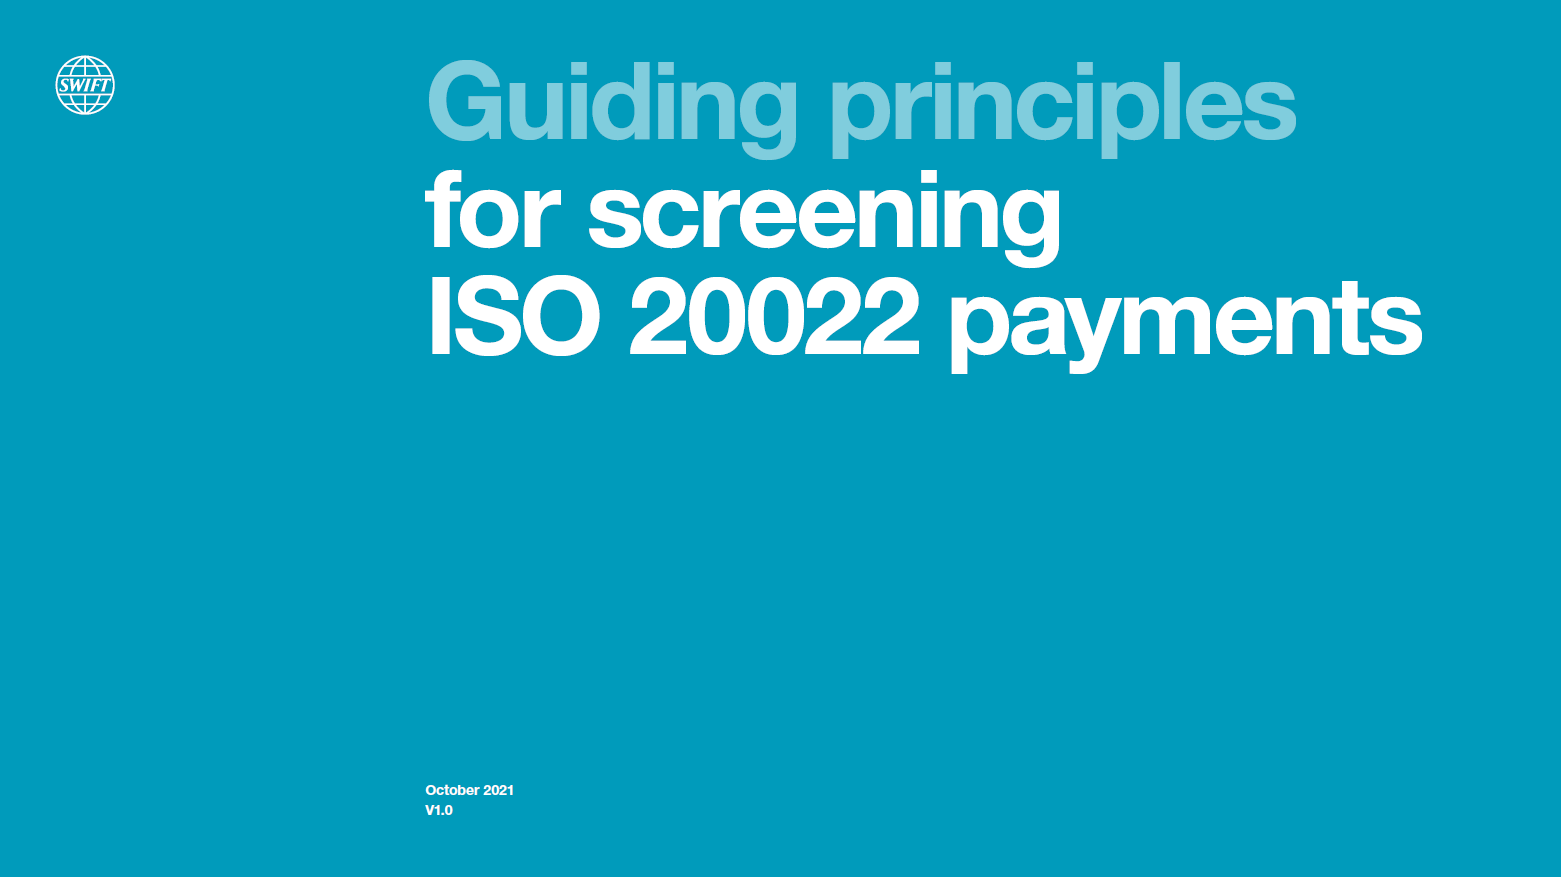 SWIFT Guiding Principles for Screening ISO 20022 Payments